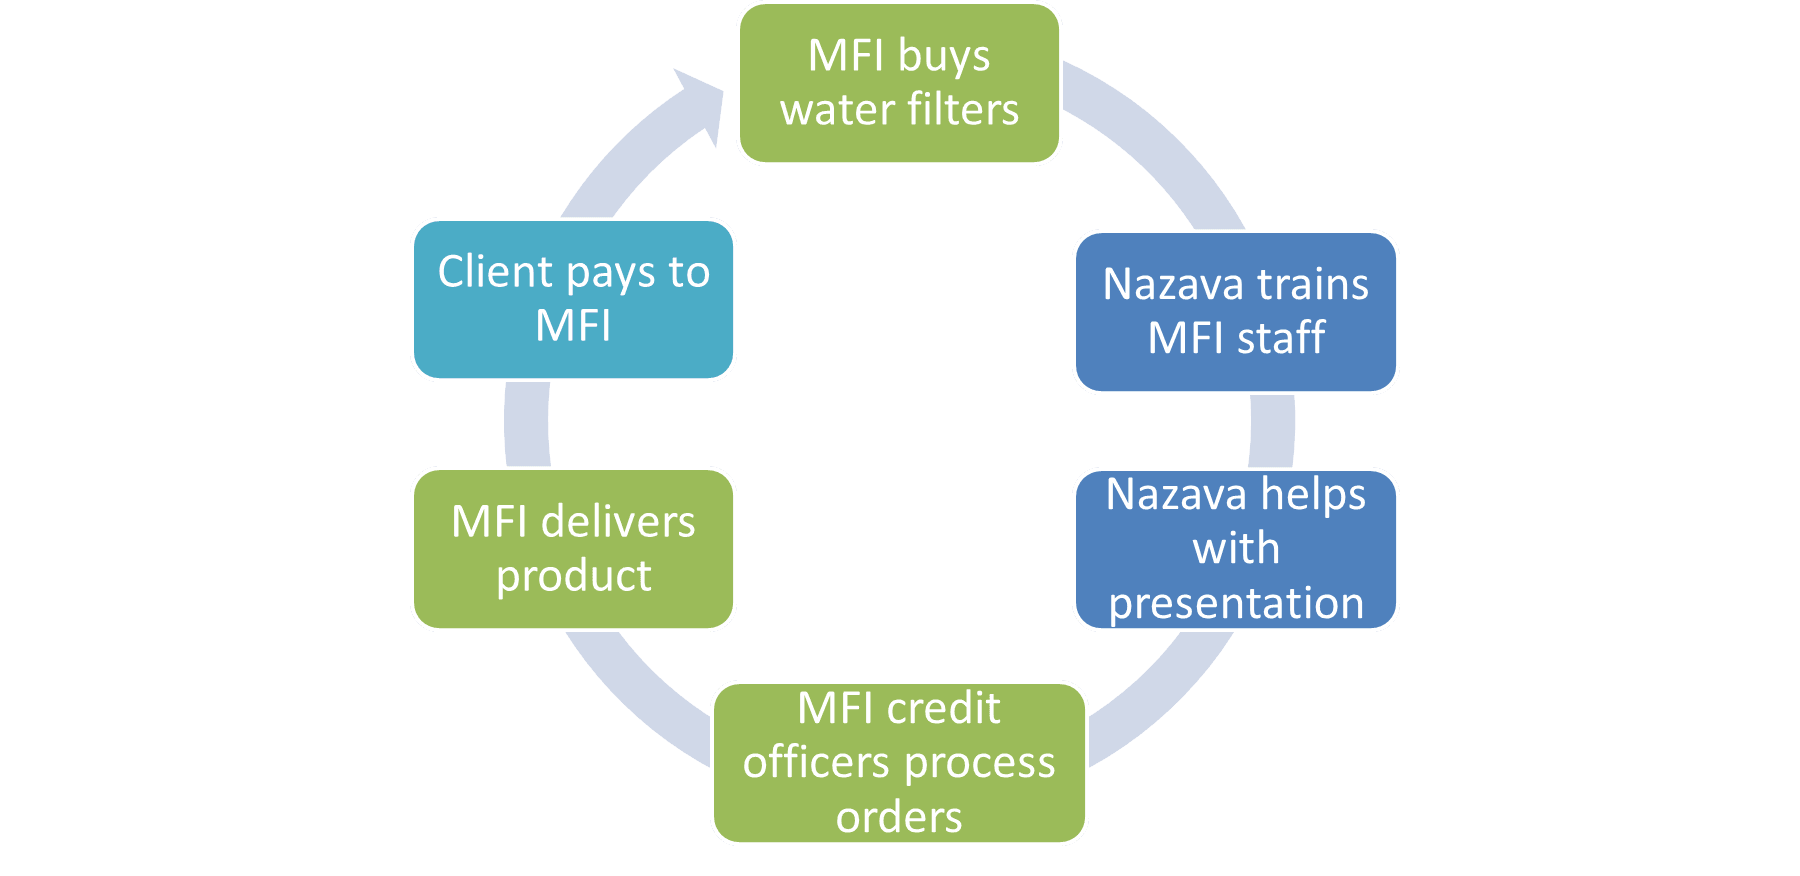 flow chart distribution of water filters through Micro finance institutes